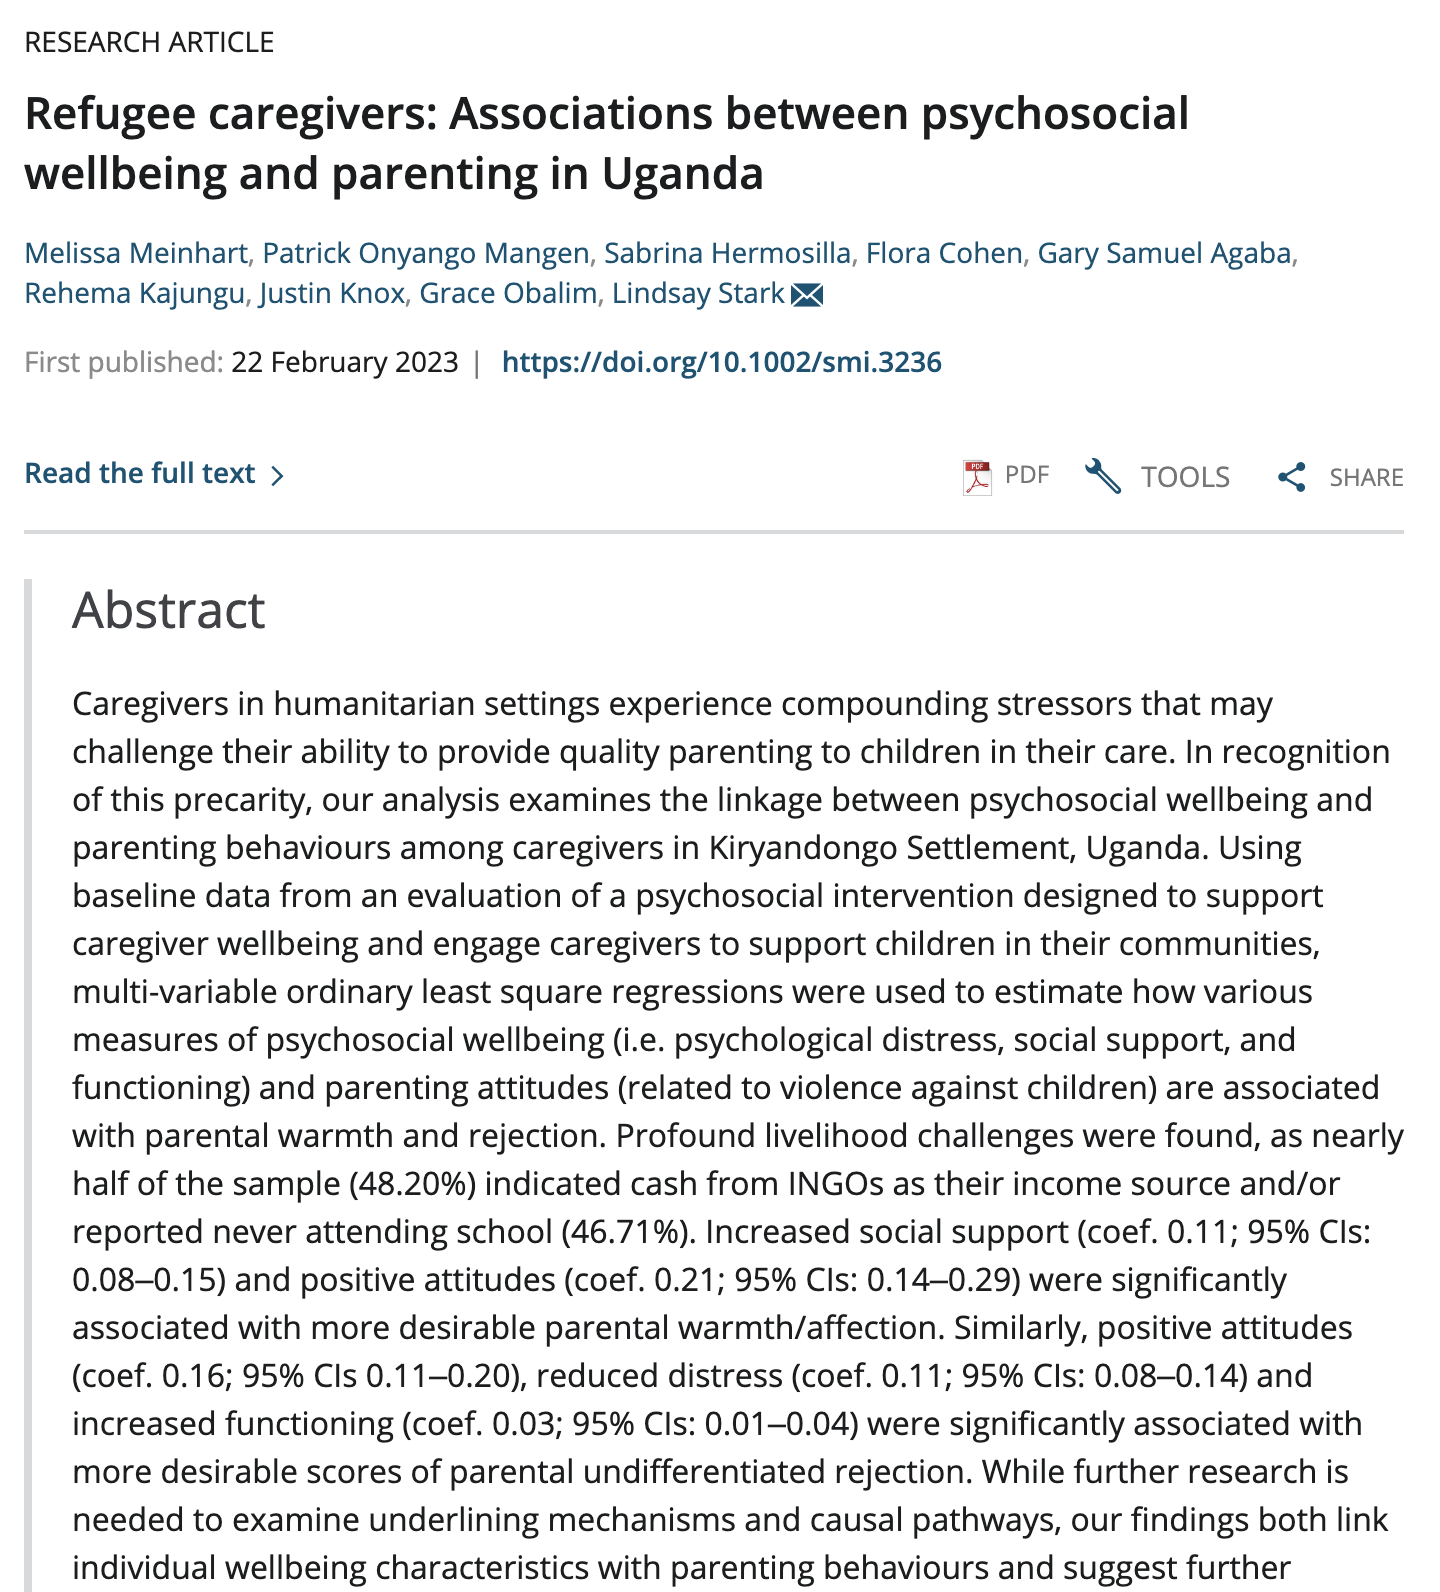 Refugee caregivers: Associations between psychosocial wellbeing and parenting in Uganda